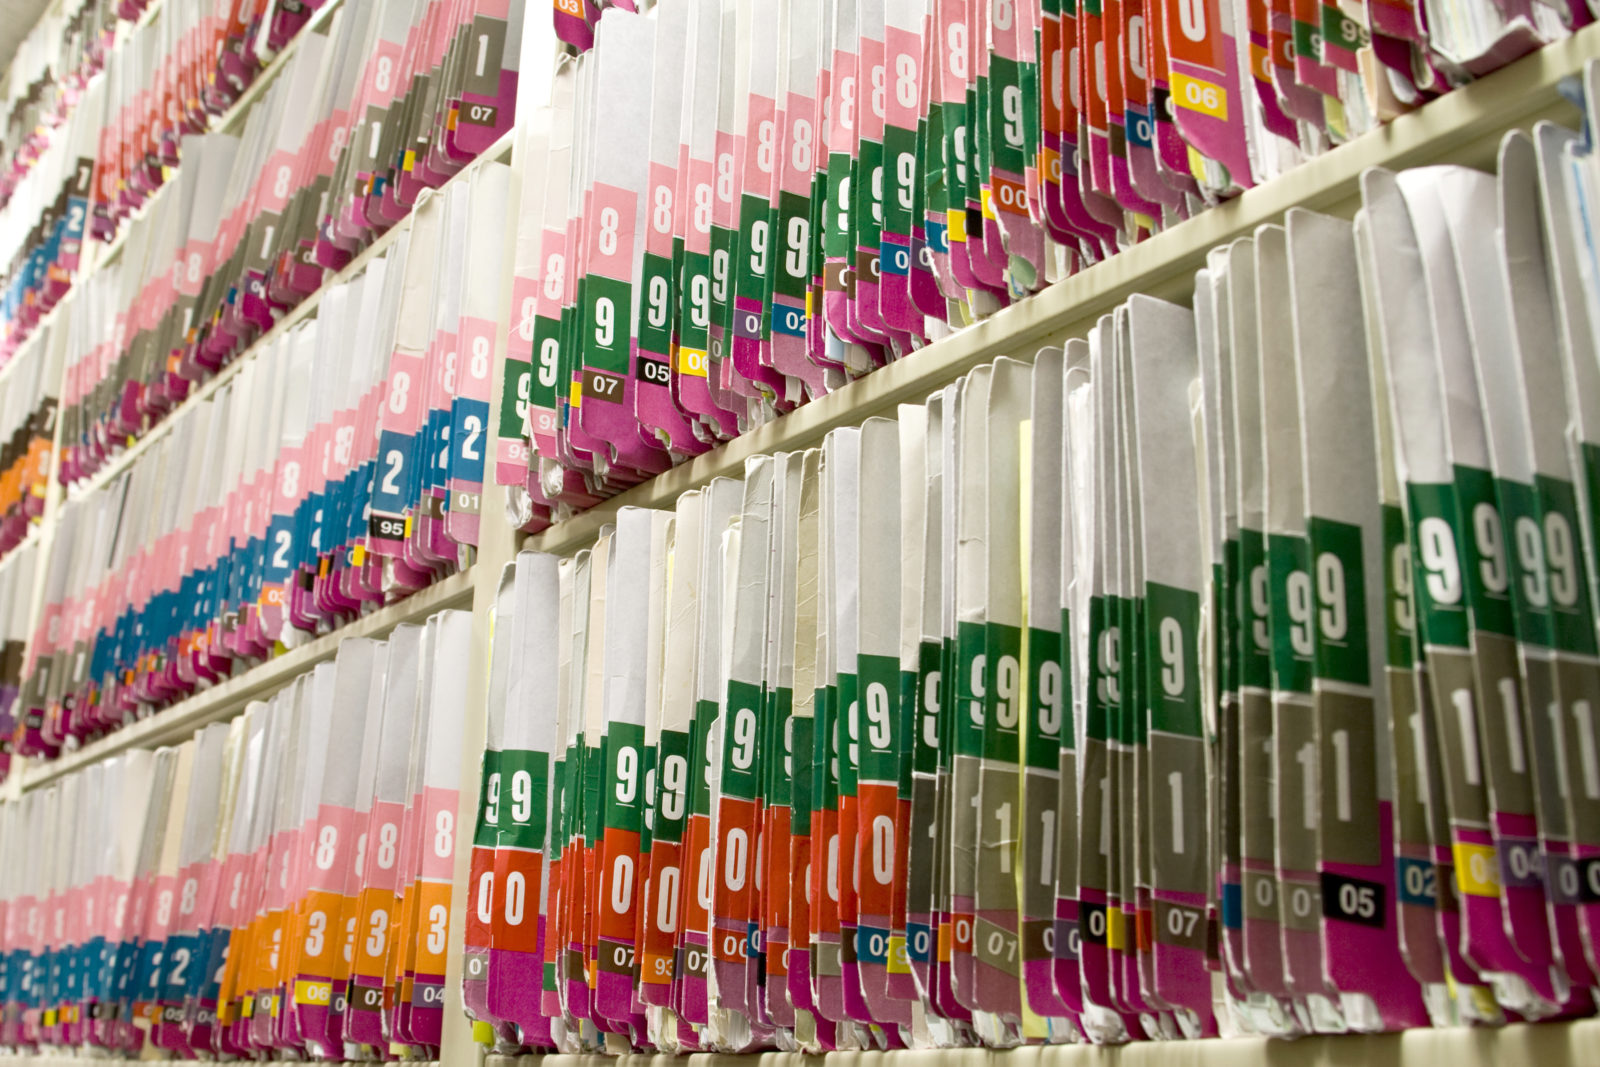 Rows of Colorful Medical Records - Patient Charts